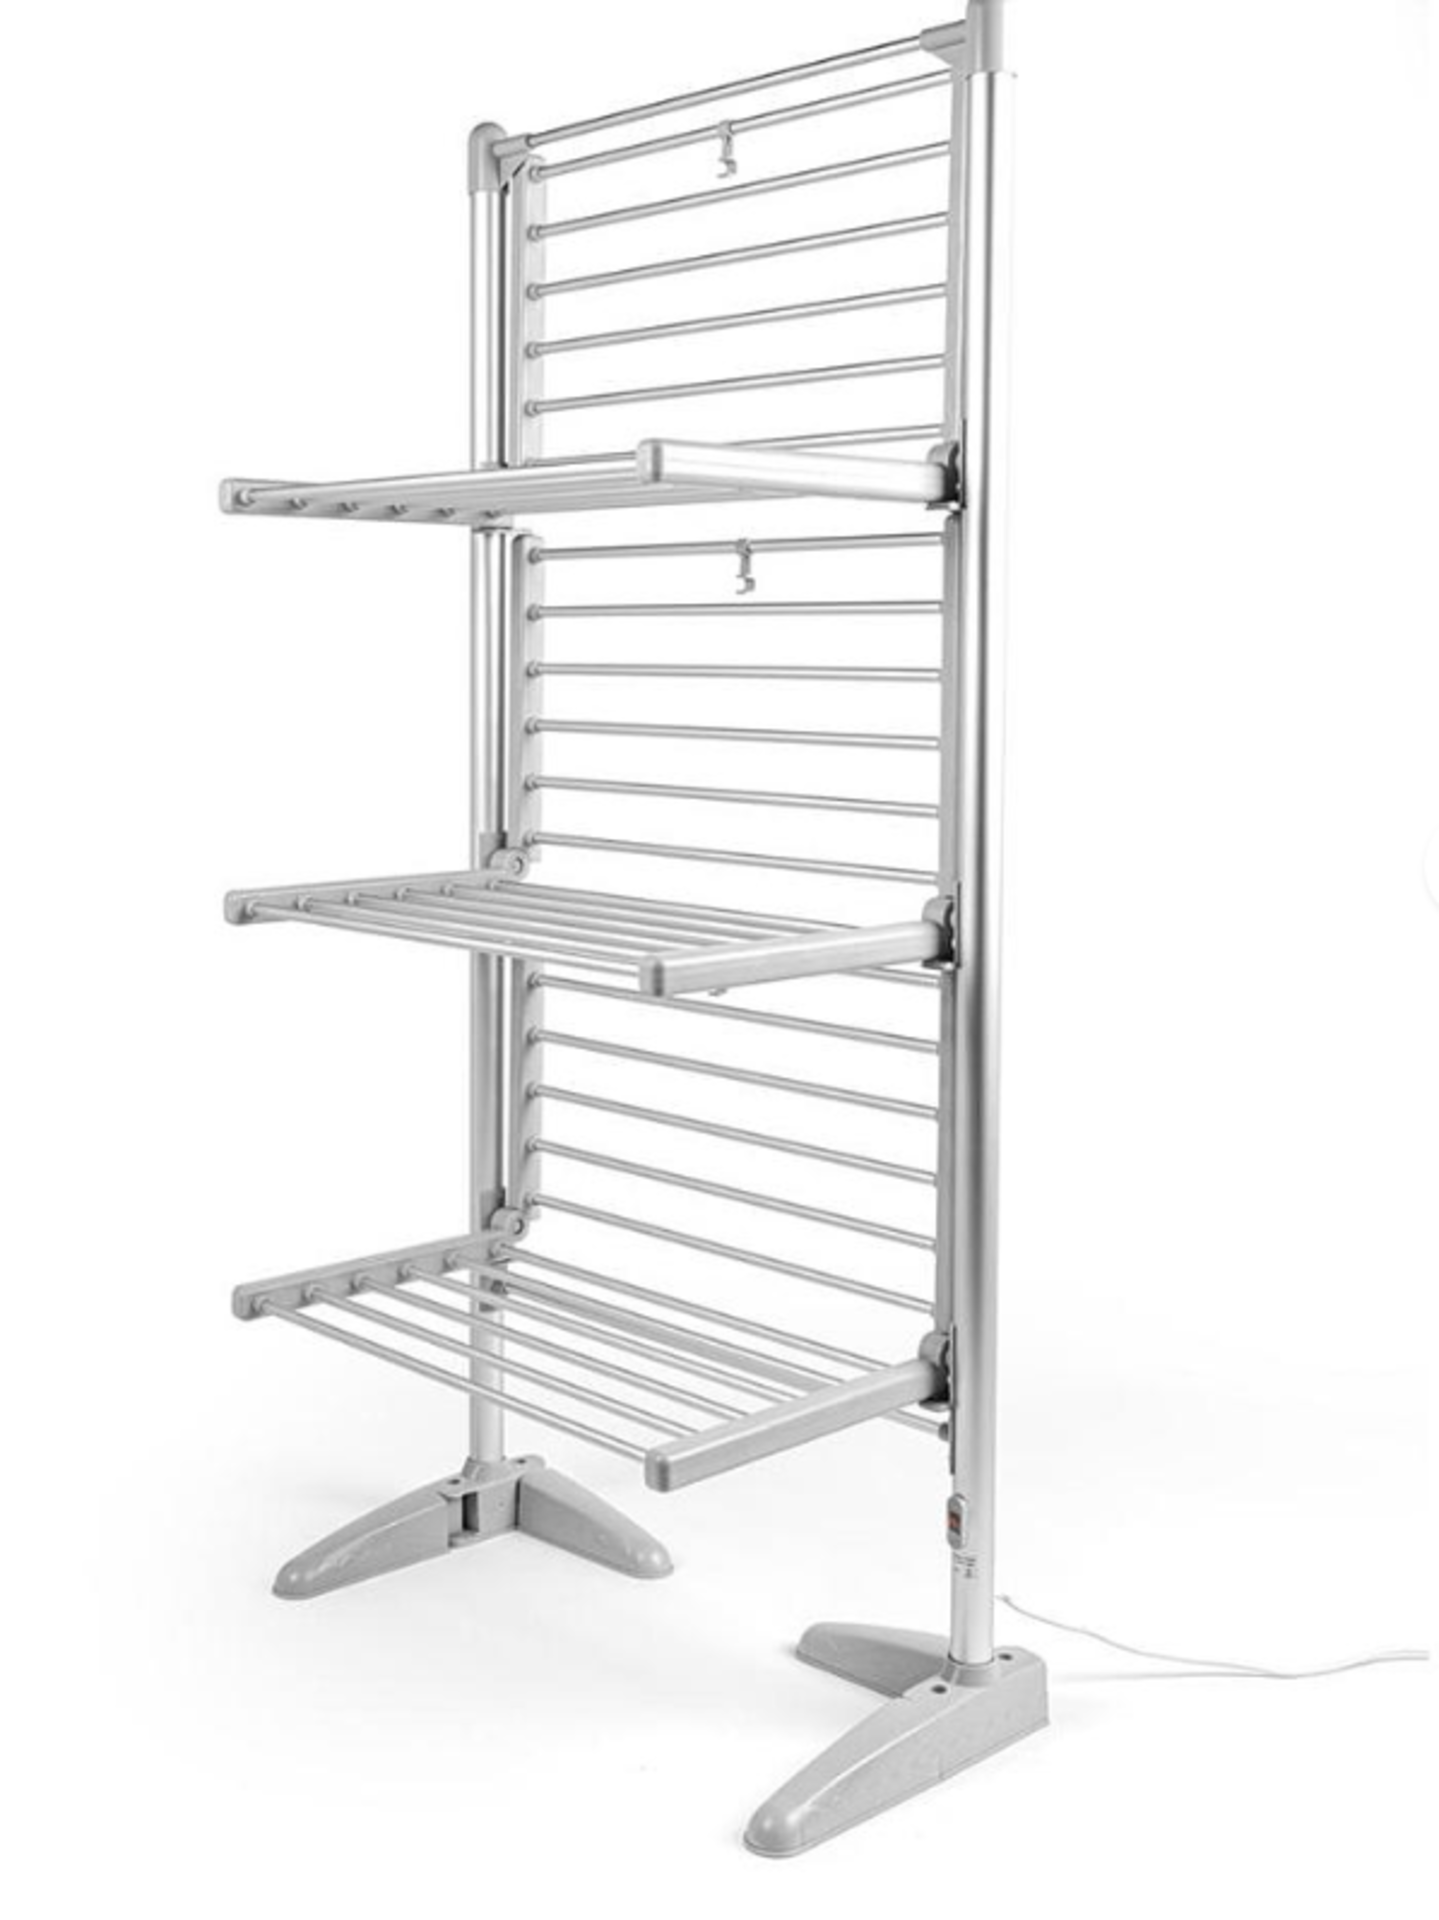 Beldray Tiered Electric Heated Clothes Airer - ER22. This Beldray Heated Airer is the perfect